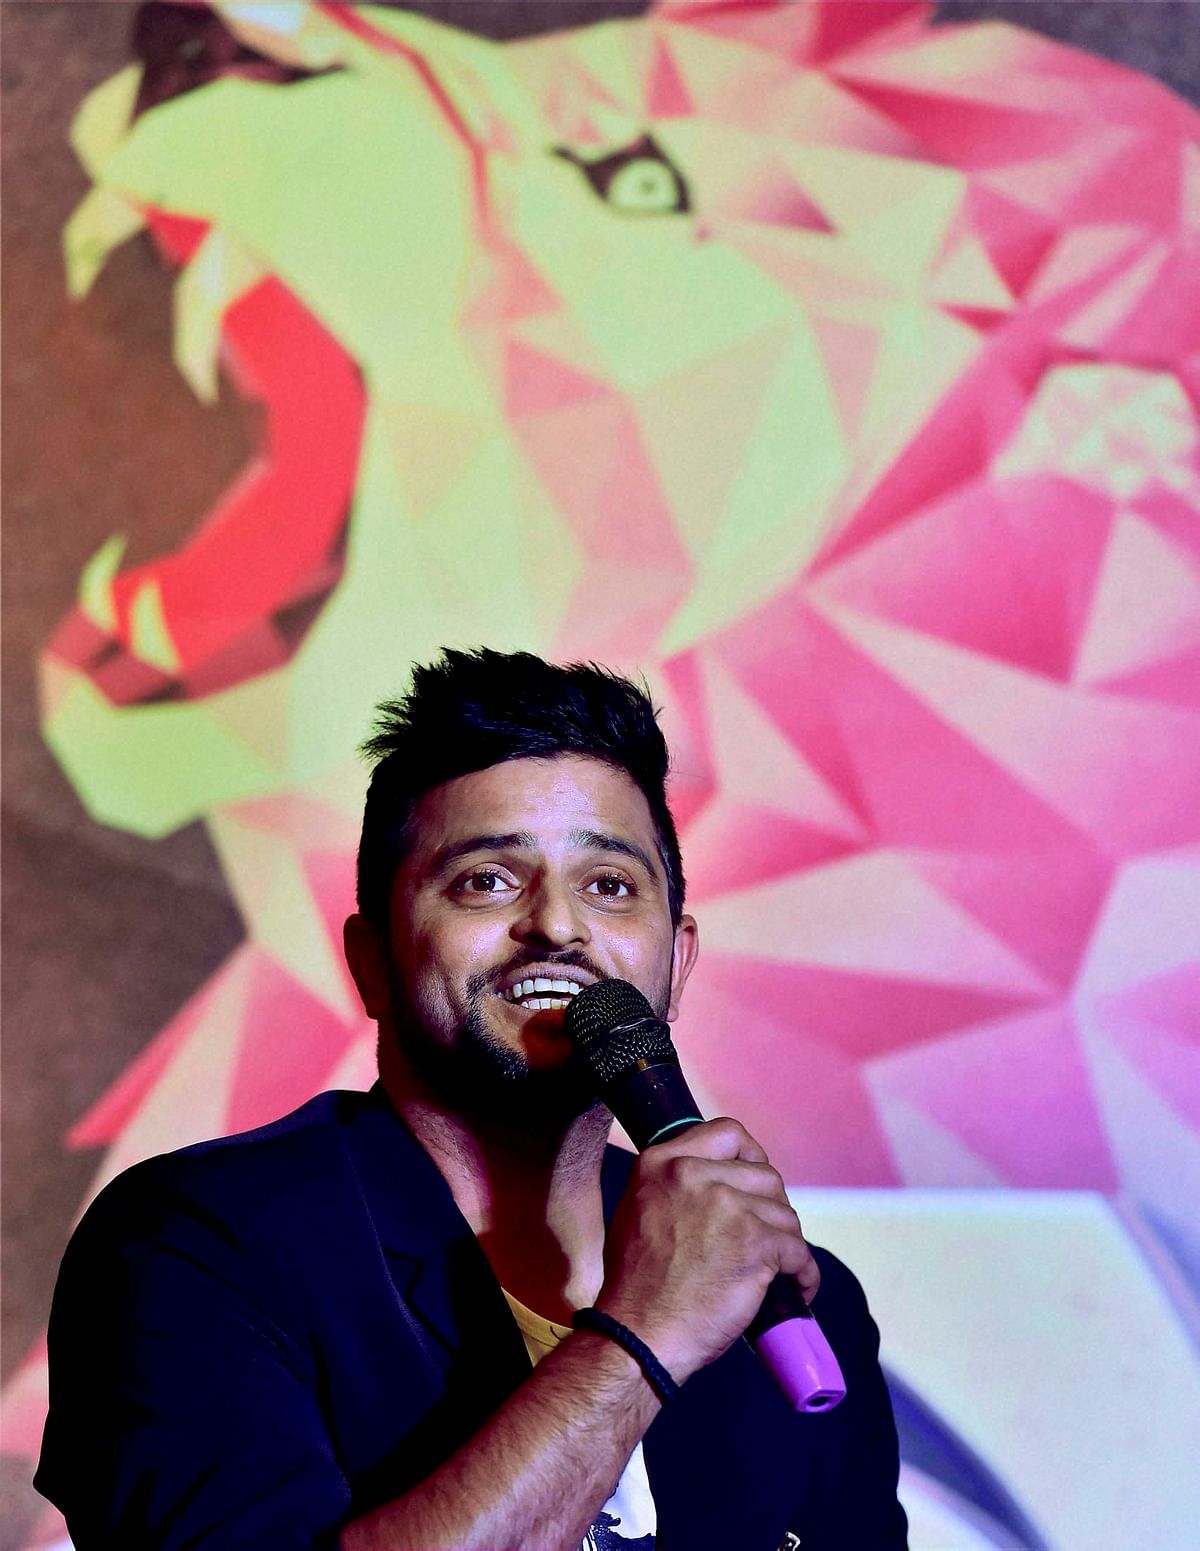 “It will be an emotional moment for me when I play for a different team this year,” said Raina after the announcement